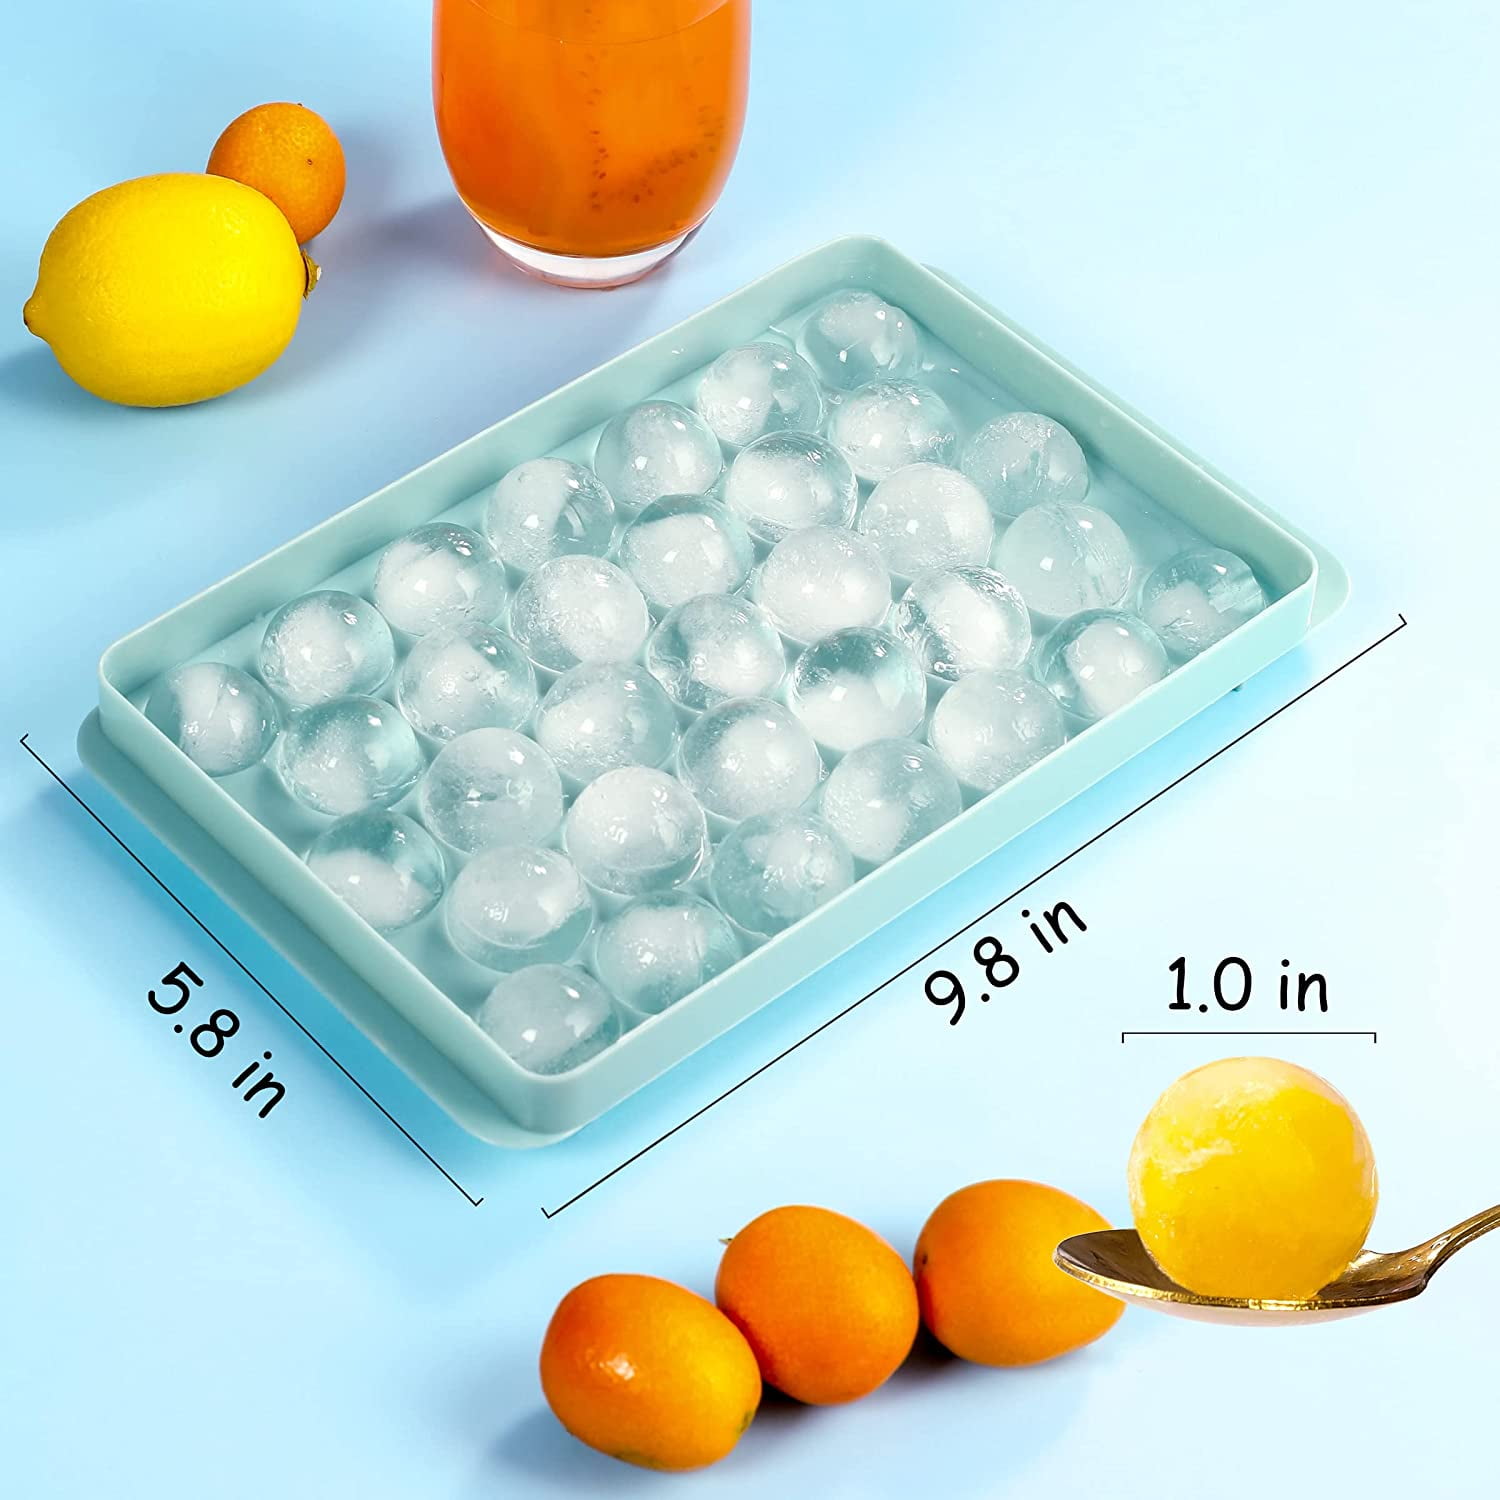 Cocopa Round Ice Cube Tray with Lid, Ice Ball Maker Mold for Freezer with Container, 2Pack Mini Circle Ice Cube Tray Making 66pcs Sphere for Ice